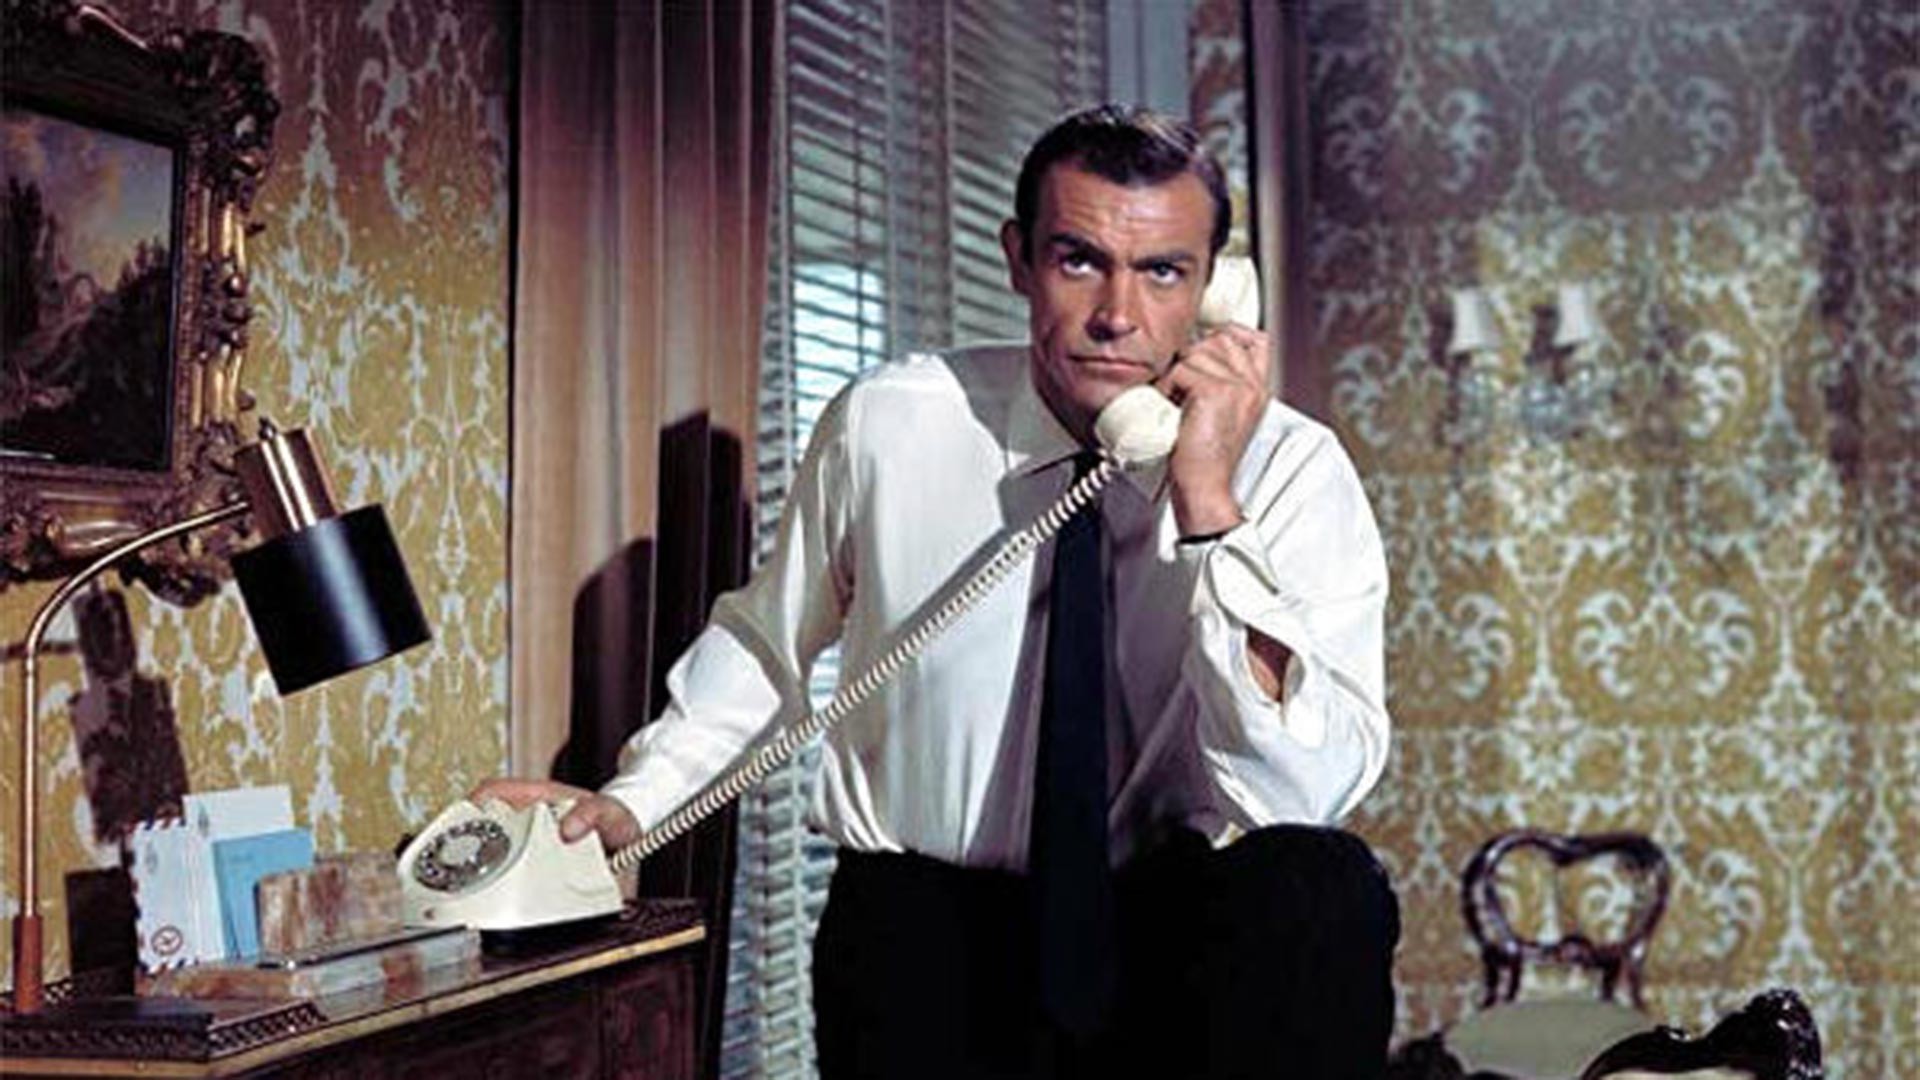 ‘From Russia With Love’ was reportedly Connery’s own personal favorite.